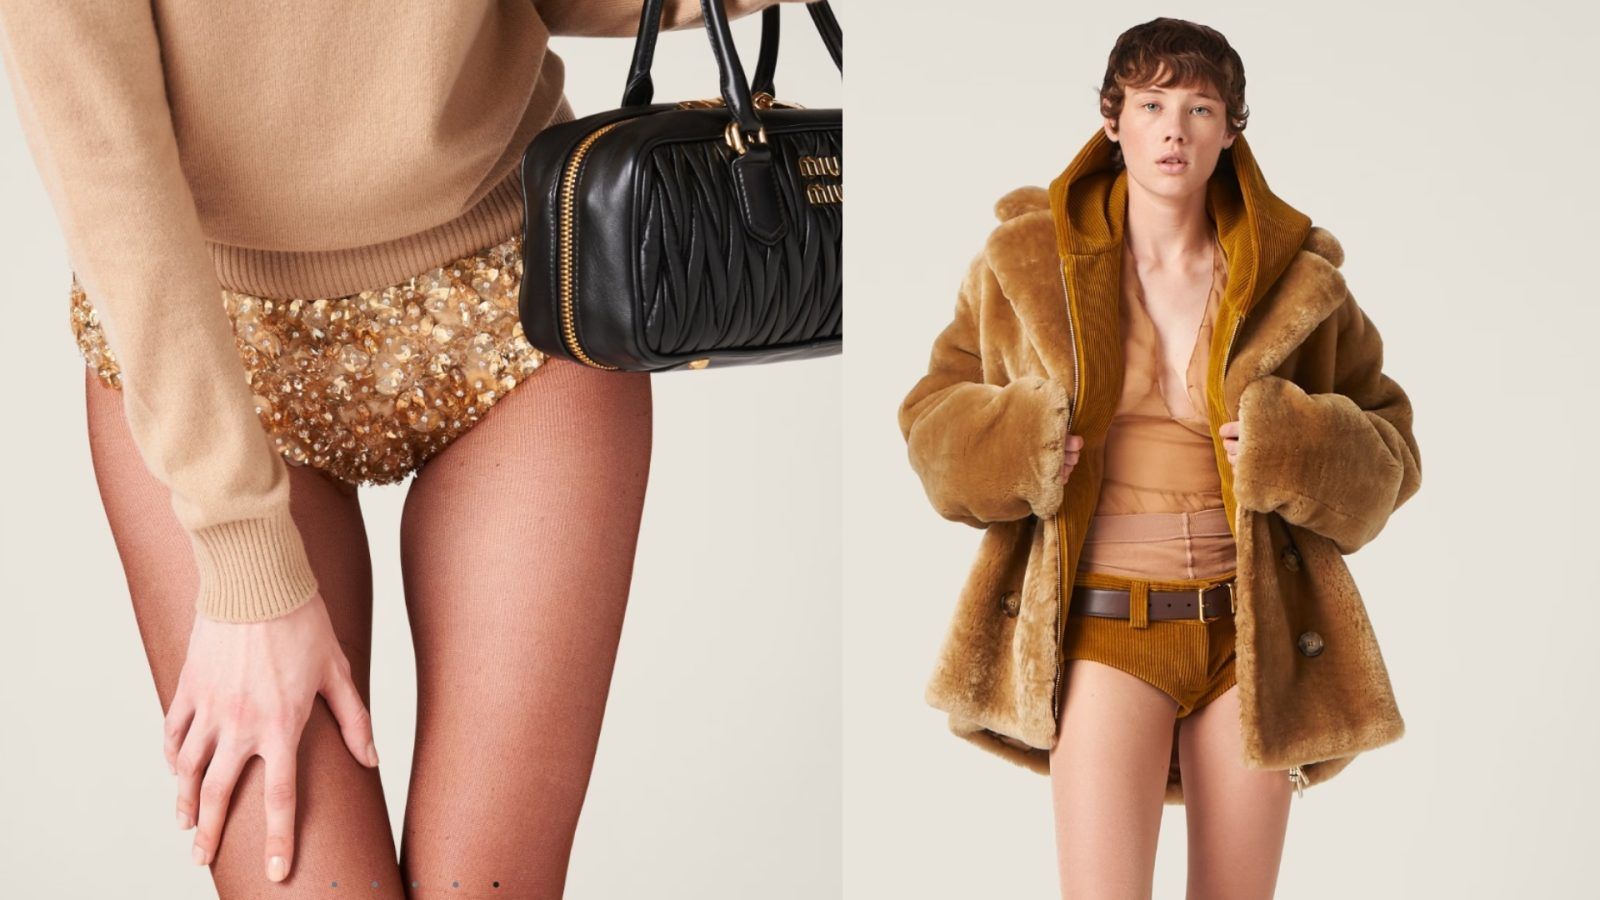 13 most expensive lingerie and innerwear ever made